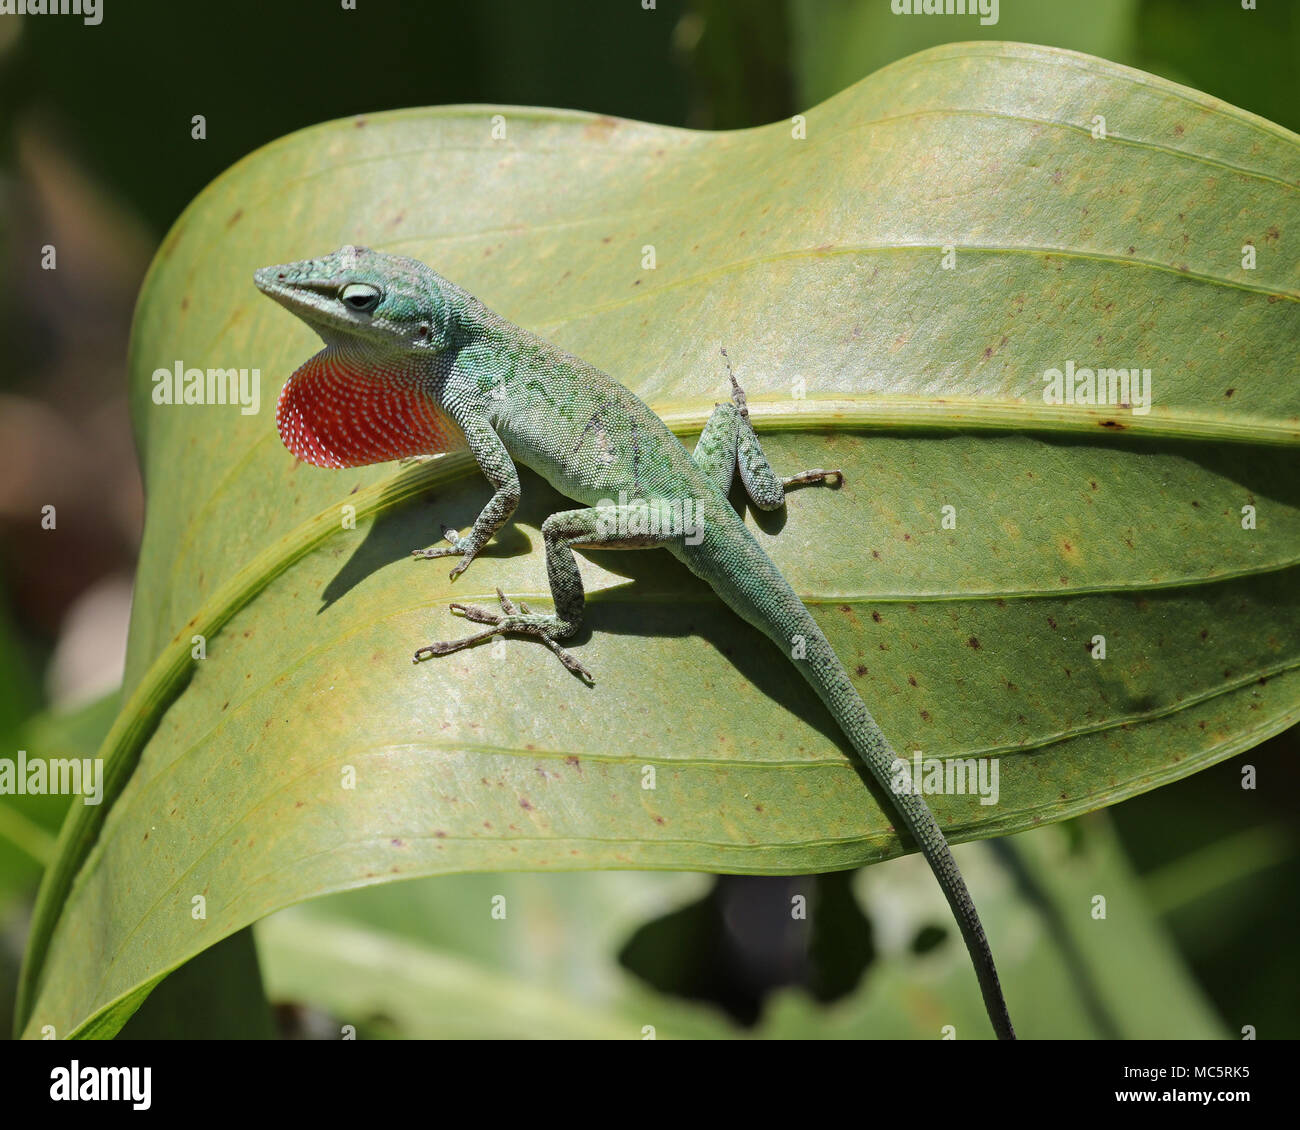 Green anoles are often kept as pets as they are so adorable with their green coloring and colorful pink throat pouch which is actually called a dewlap. Stock Photo